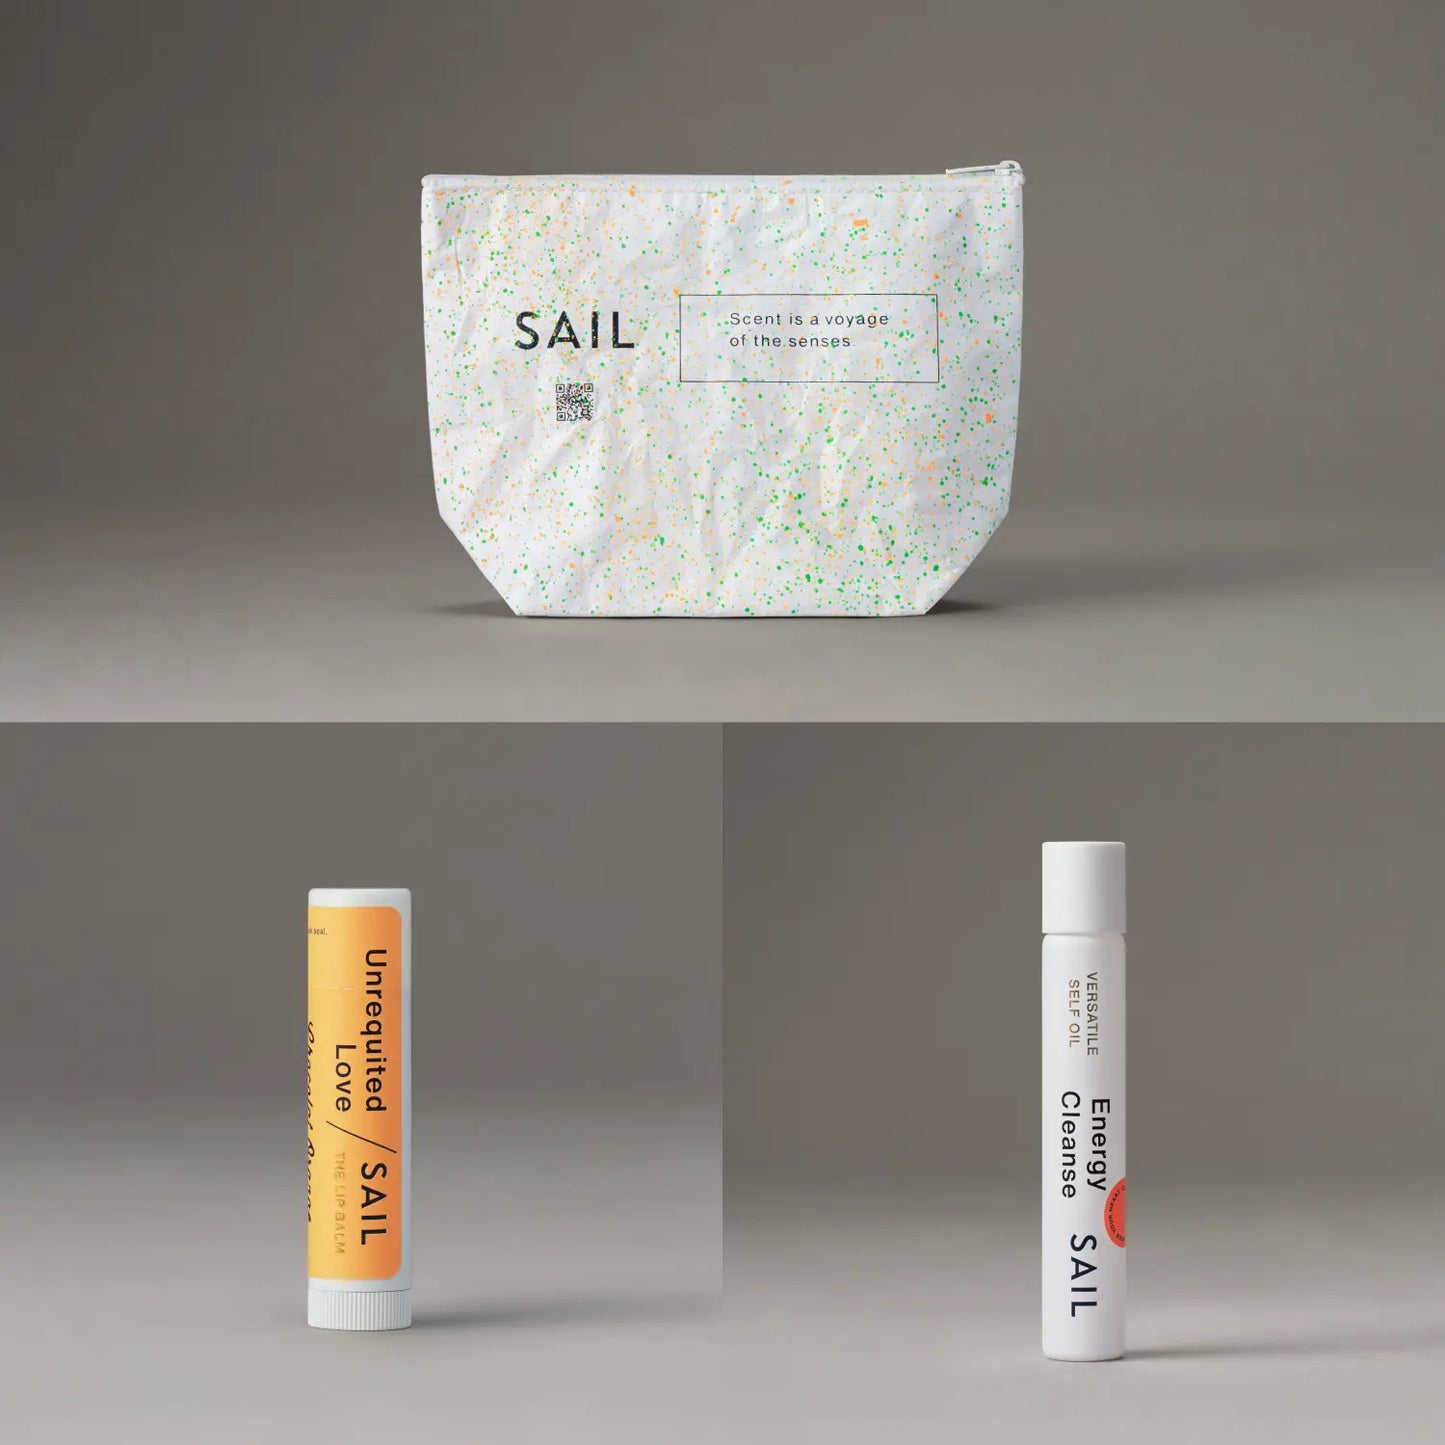 SAIL THE LIP BALM Unrequited Love "SPECIAL KIT"-B / THE LIP BALM Unrequited Love / Chocolat Orange & VERSATILE SELF OIL / 7mL